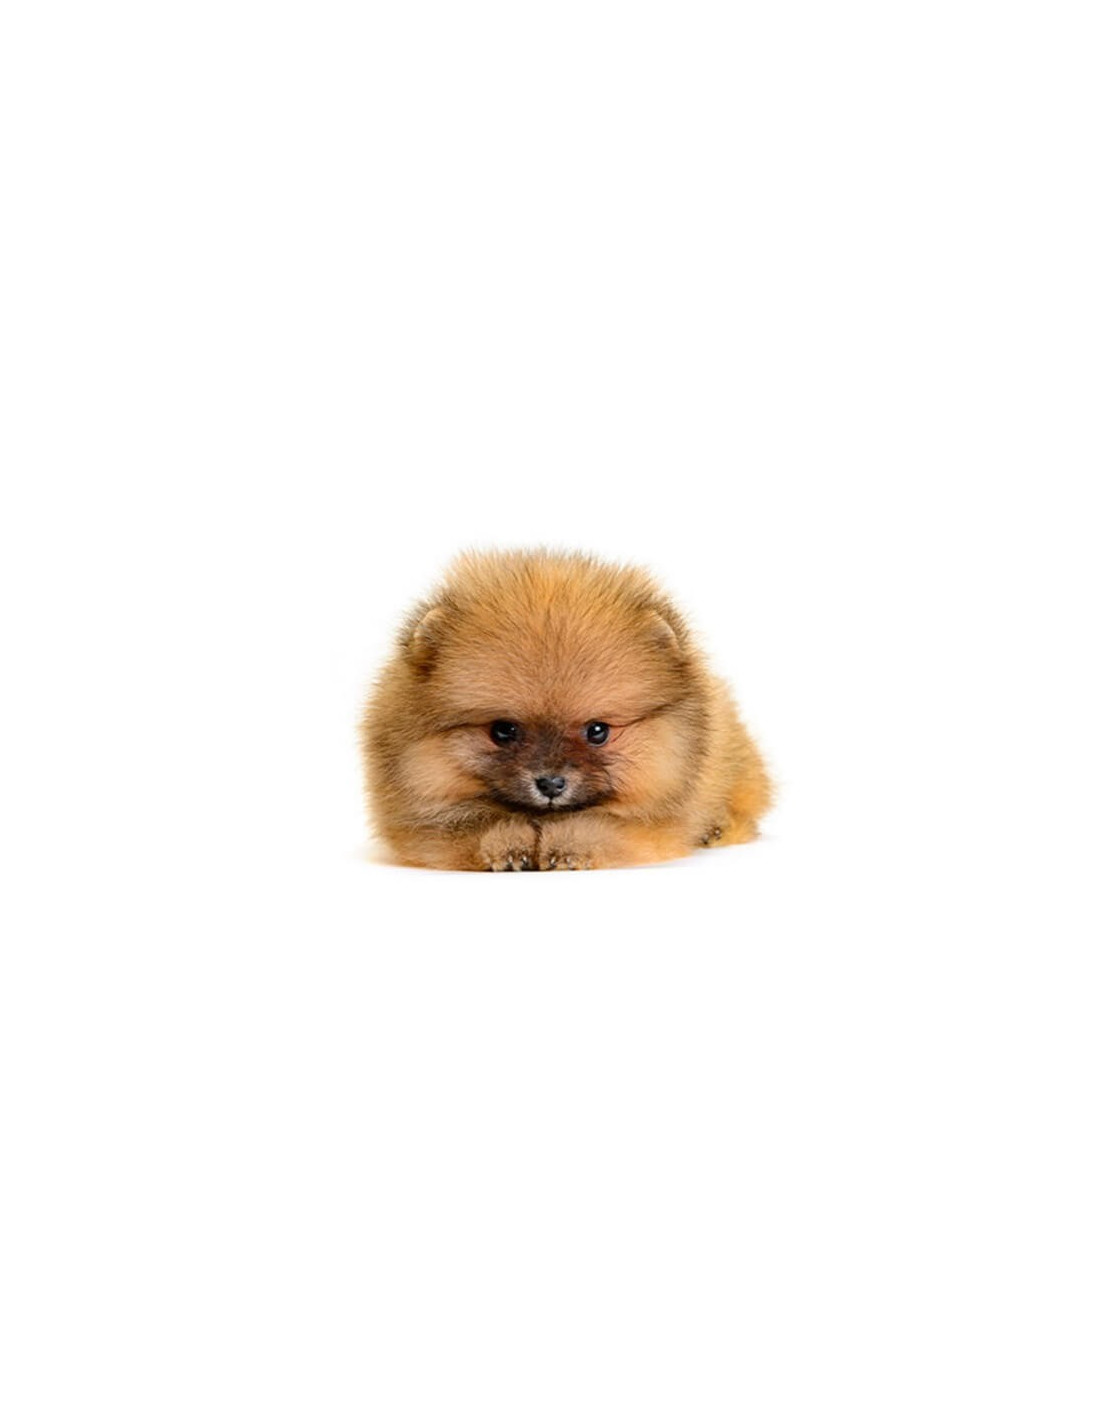 Mini Pomeranian Puppies For Sale with 